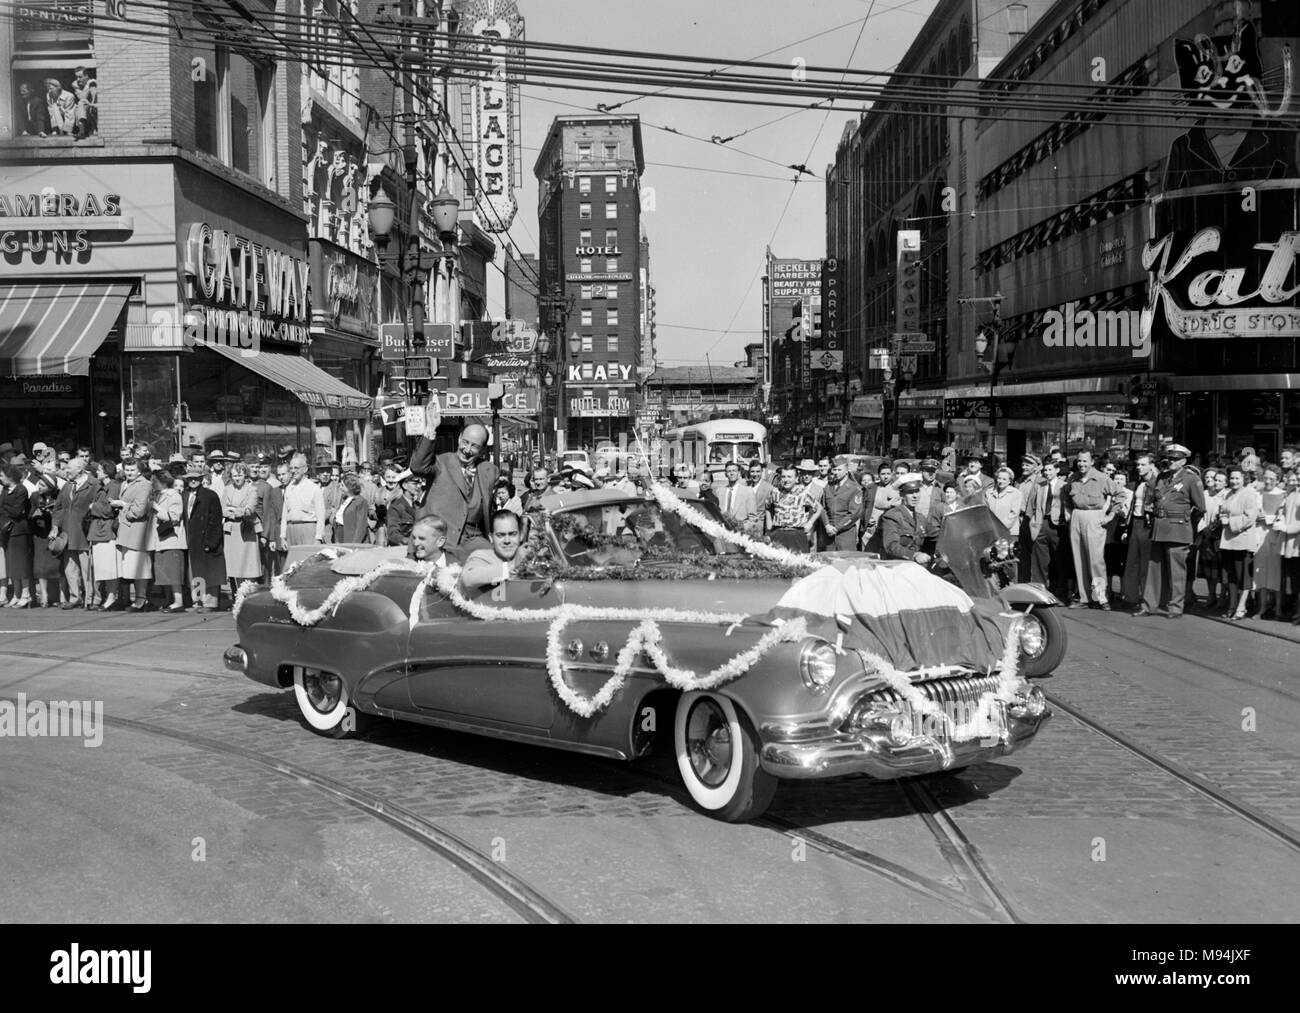 Democeratic presidential candidate Adlai Stevenson,  campaigns through downtown Kansas City, Missouri in 1952.   Kay Hotel.   The Junction. Stock Photo